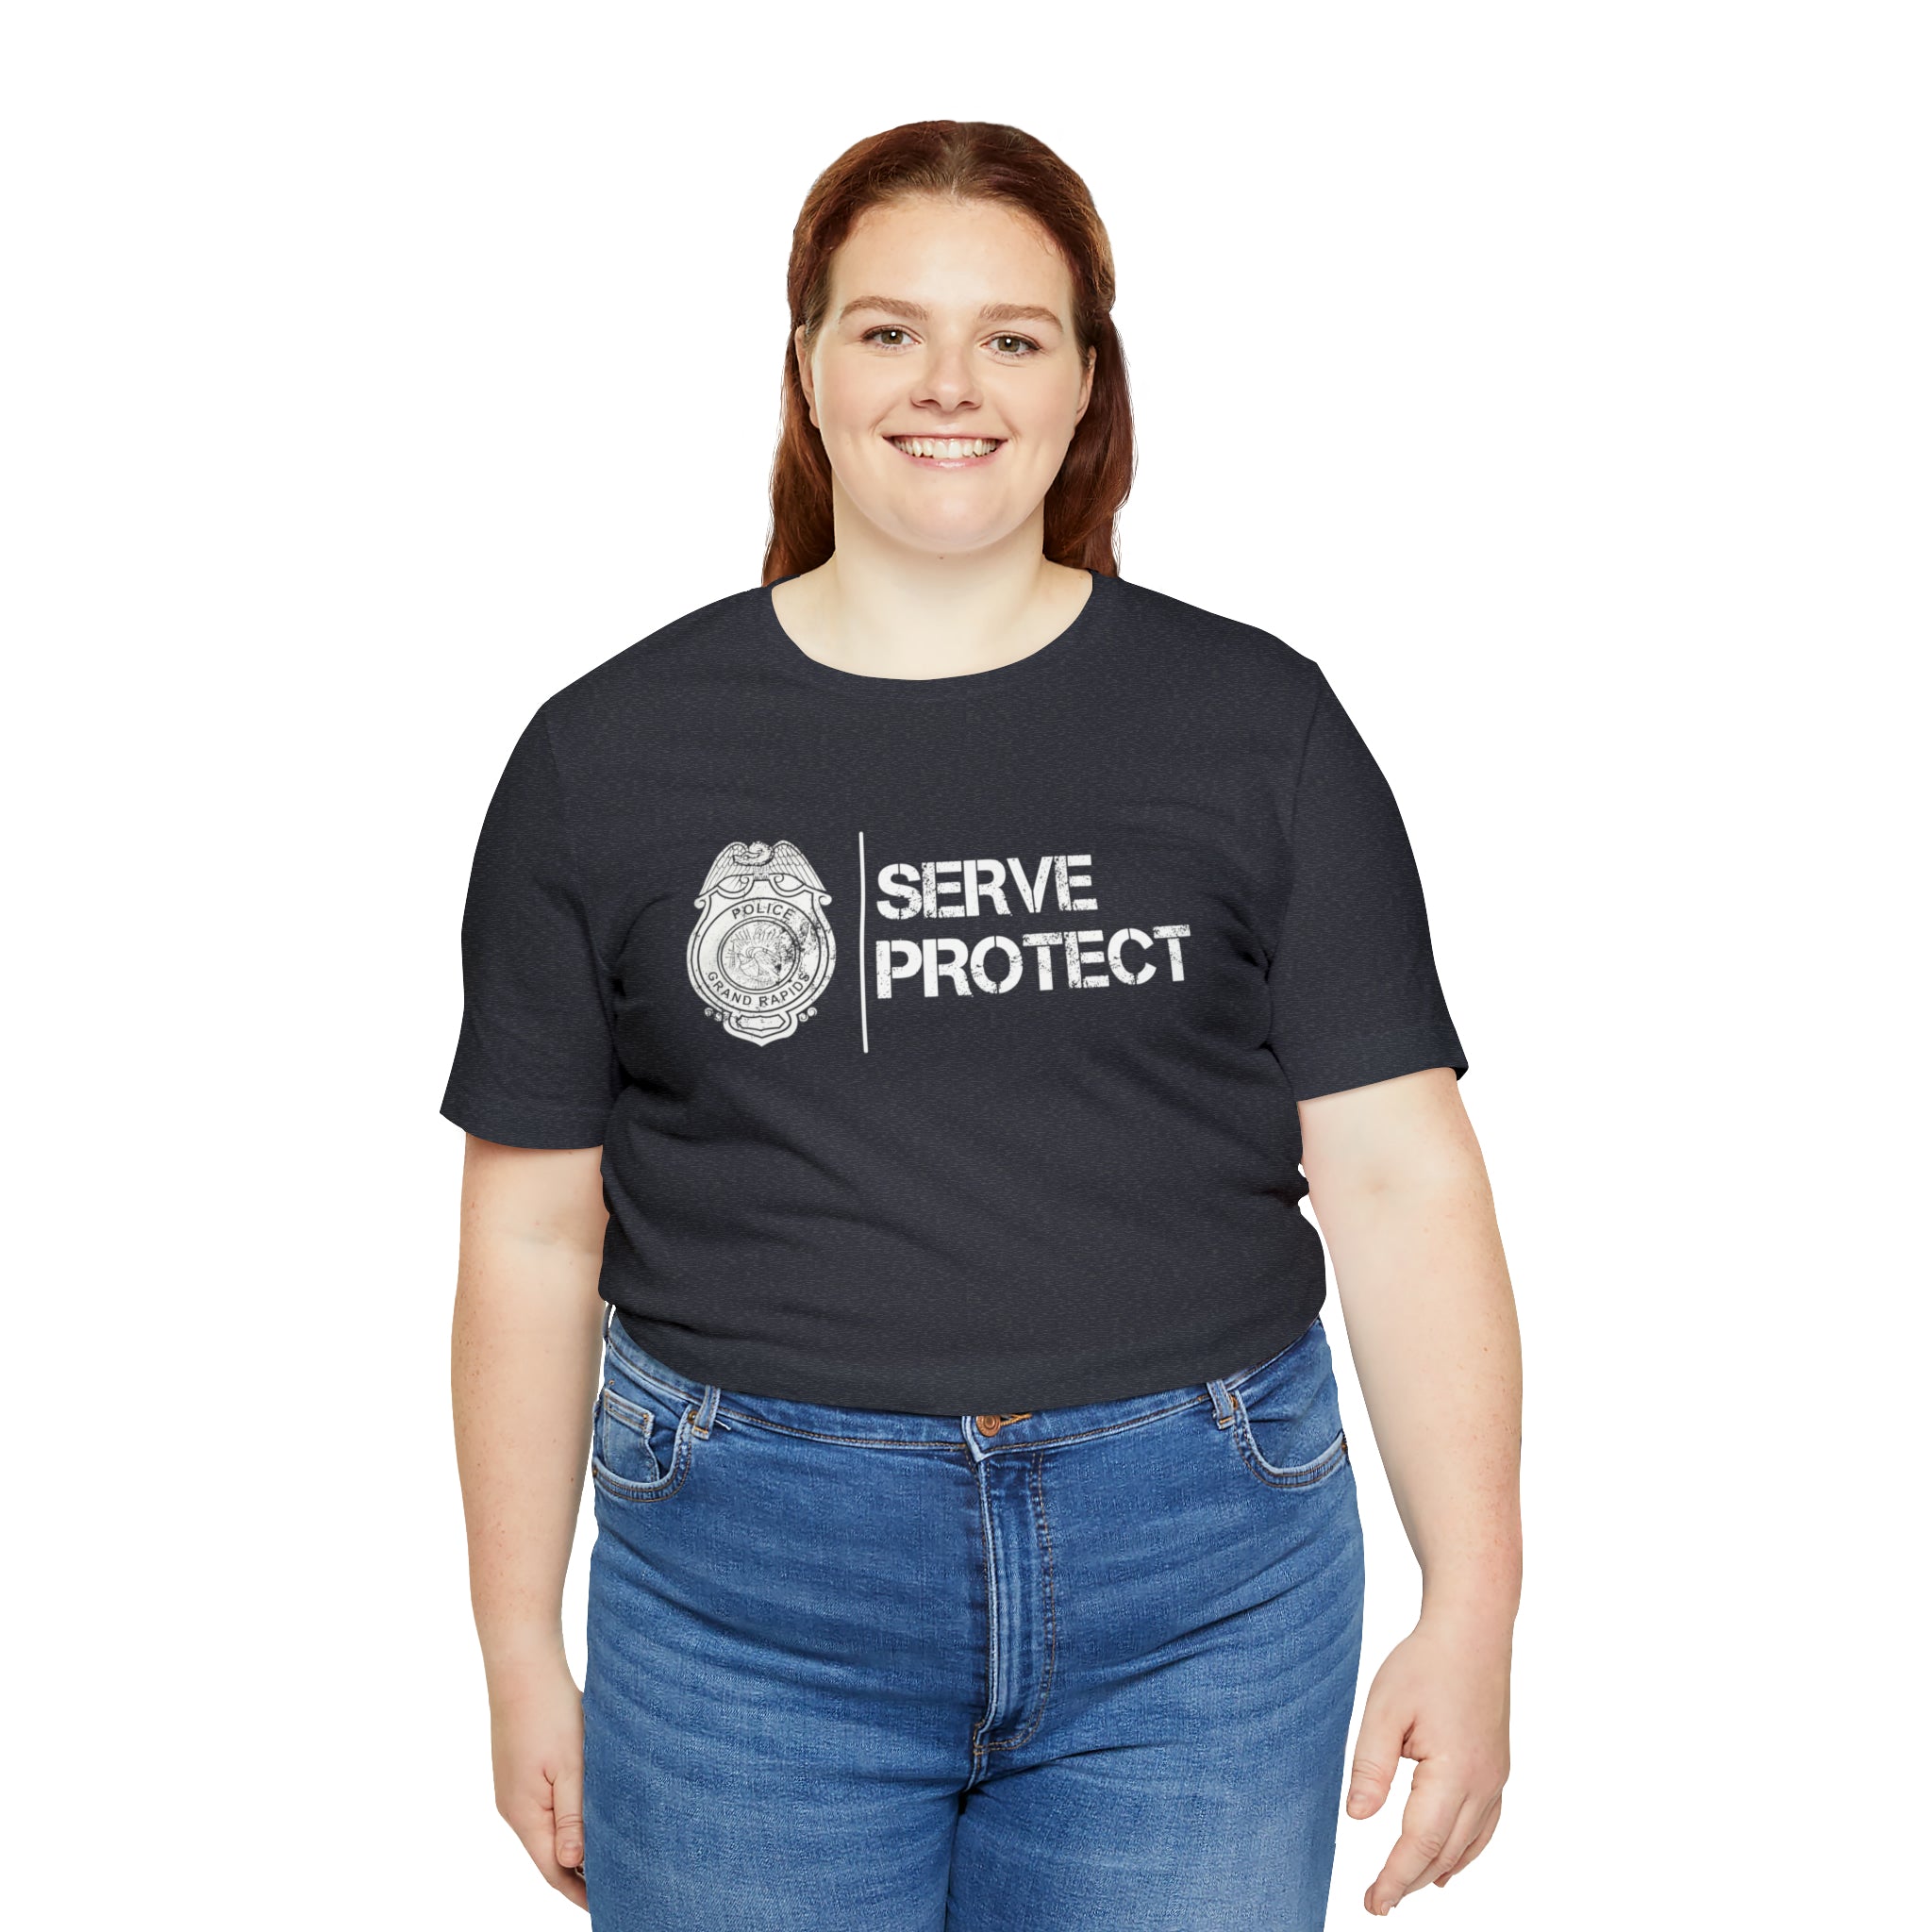 GRPD SERVE  and PROTECT